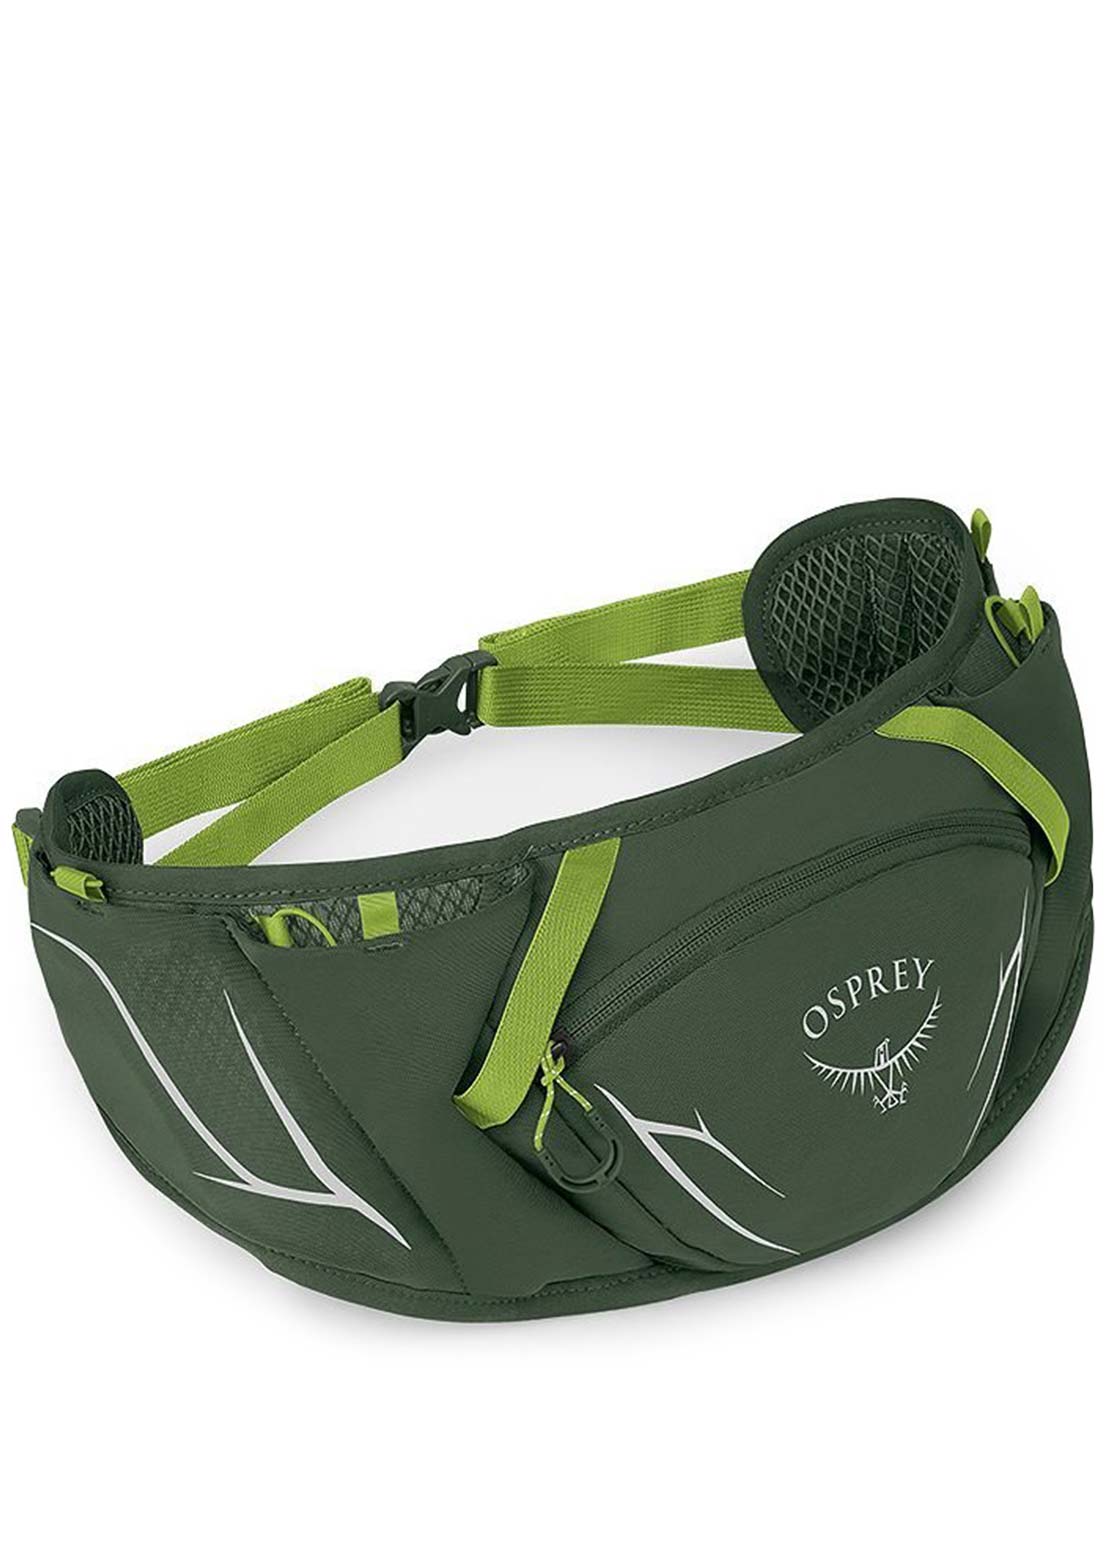 Osprey Duro Dyna Belt Waist Pack With Flasks Seaweed Green/Limon